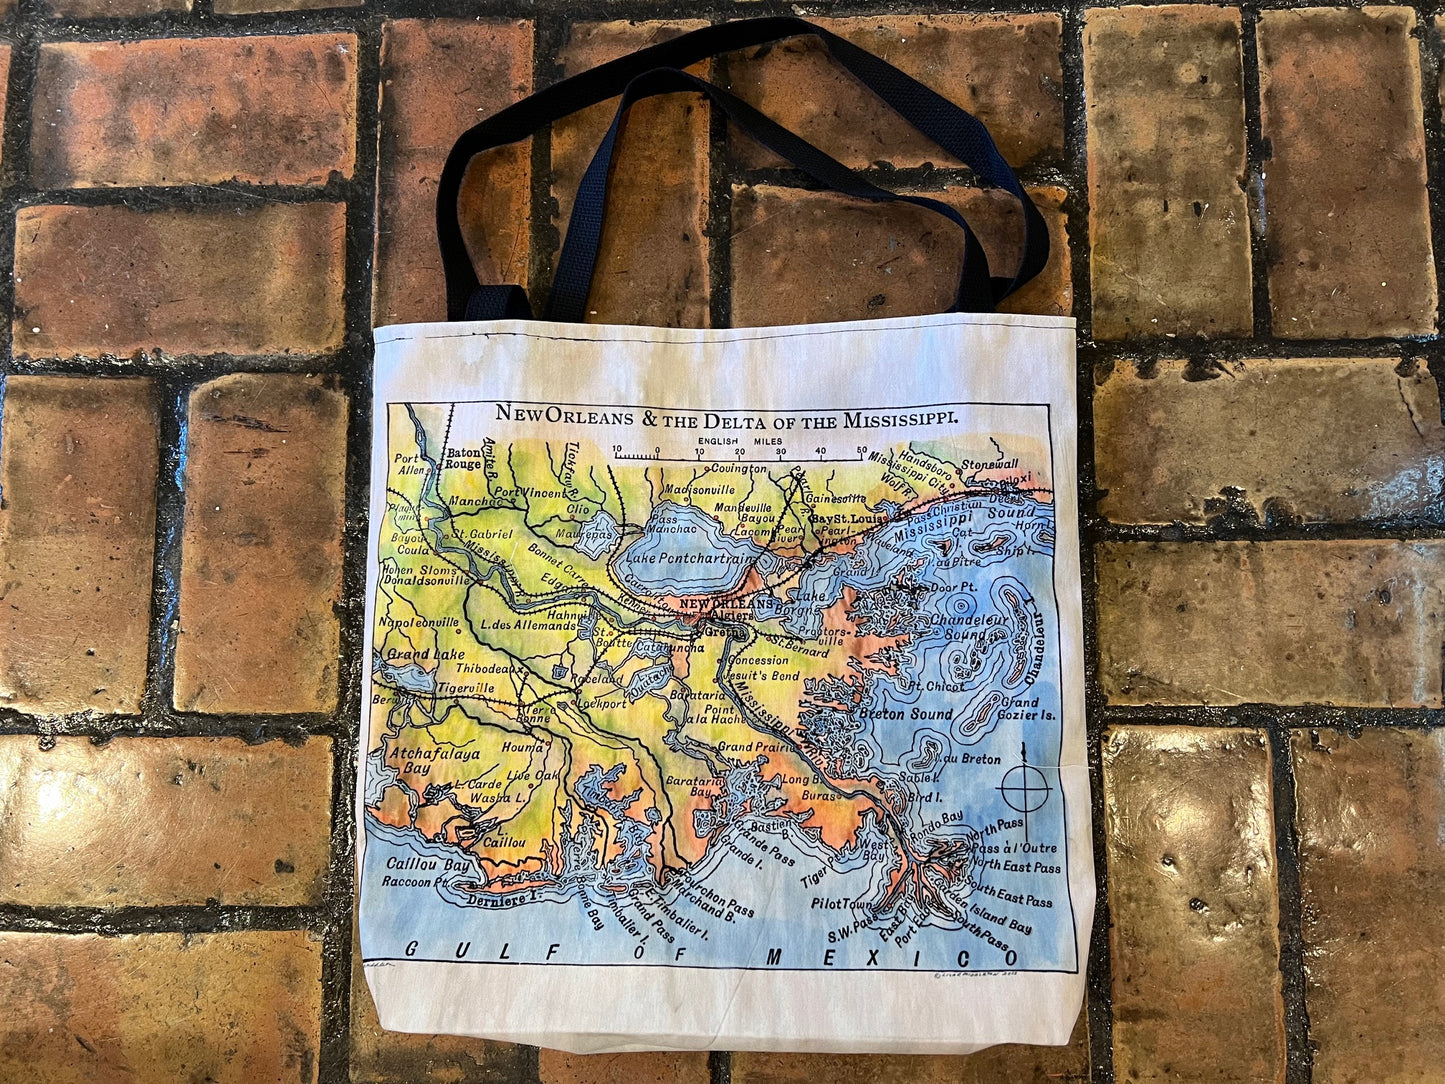 Beautiful hand painted reproduction of Bartholemew's Mississippi Delta 1906 map on a tote bag